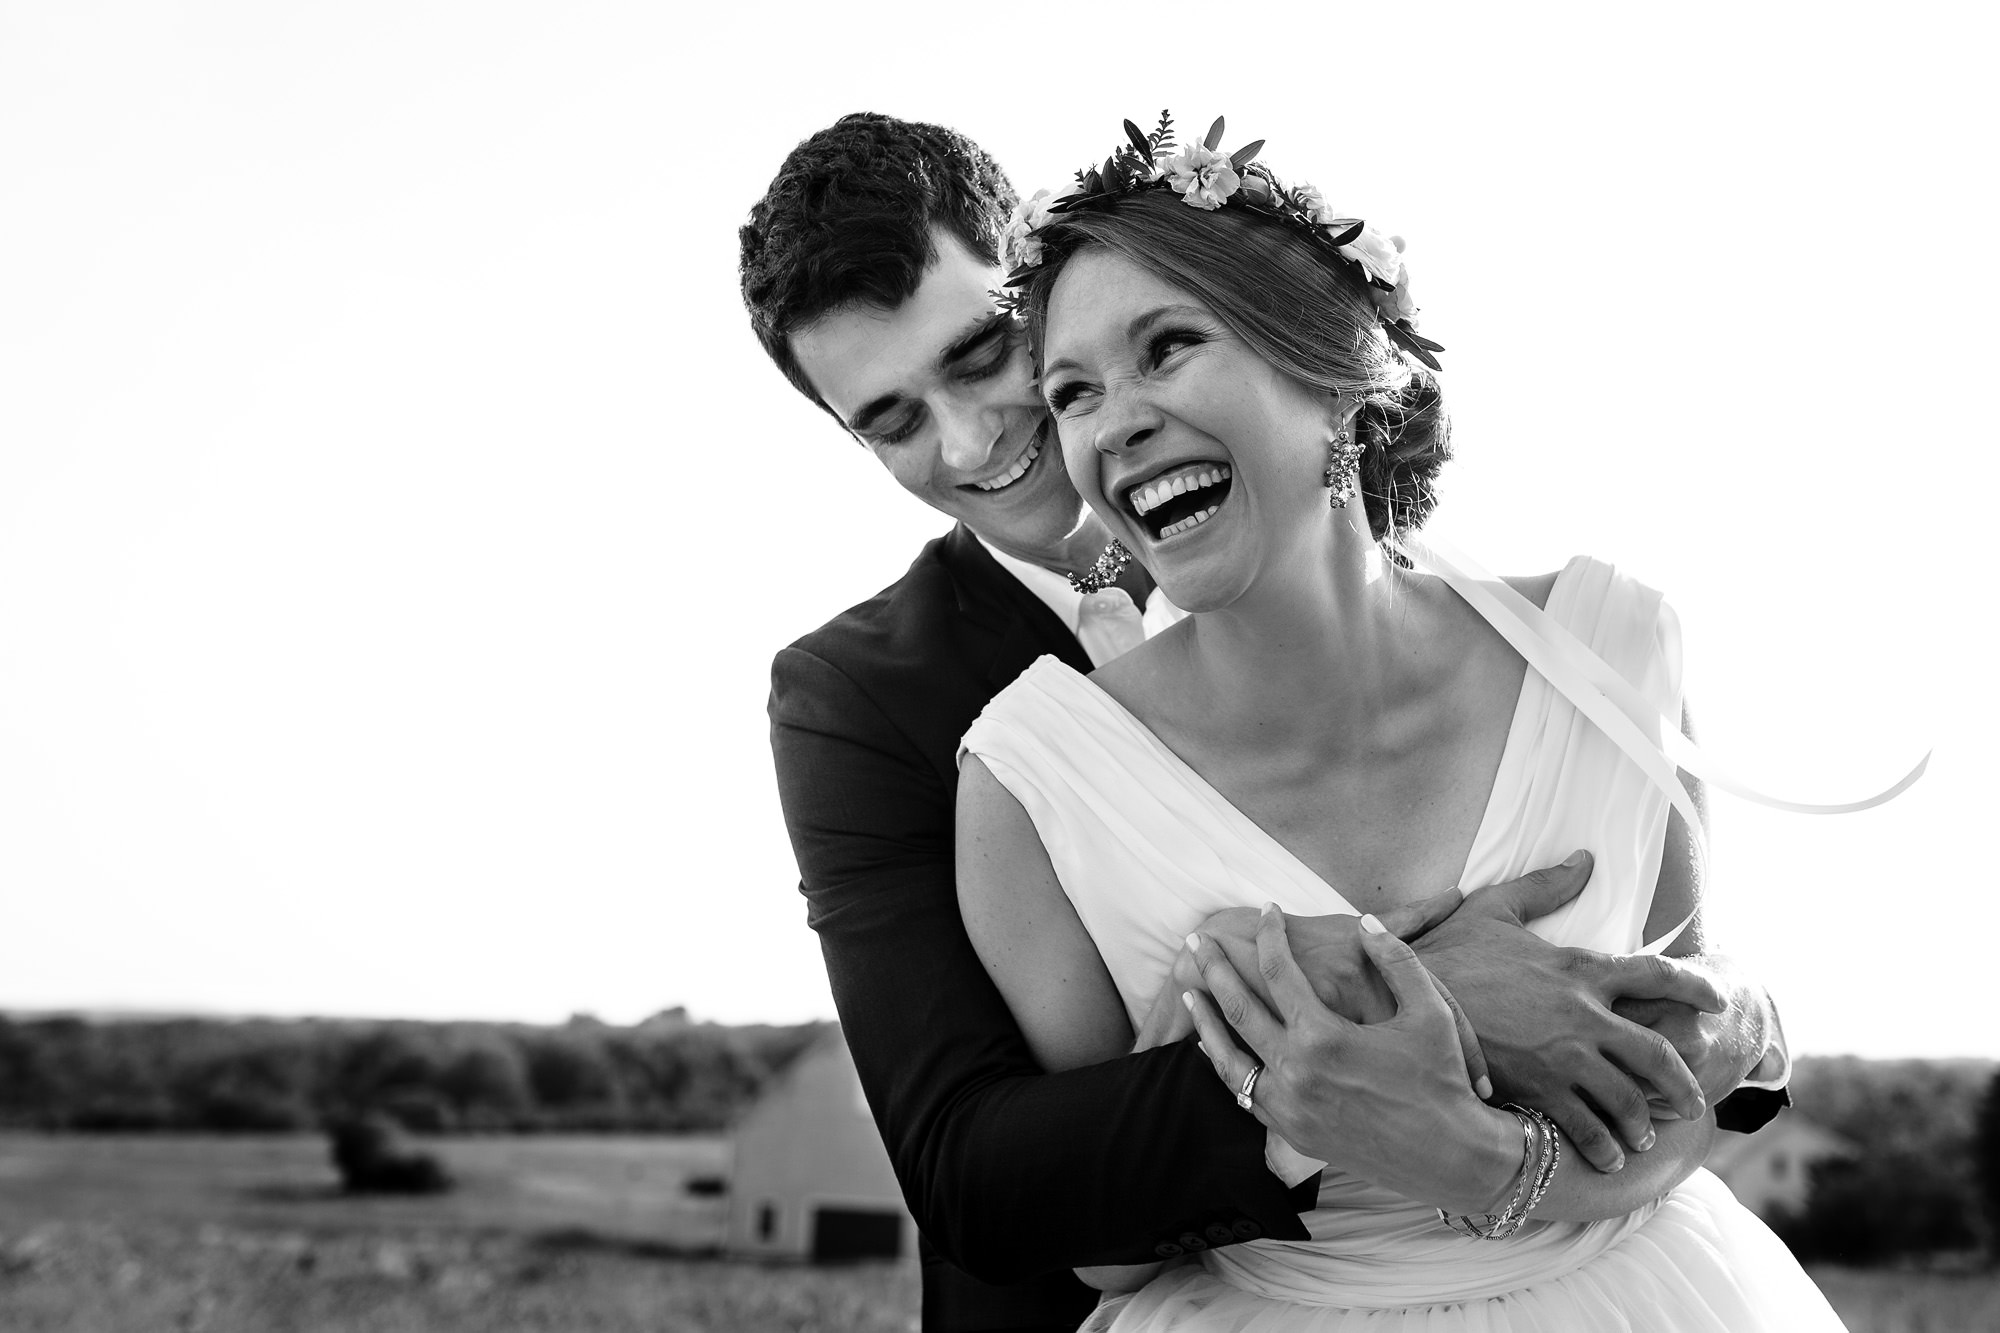 A playful portrait of a bride and groom on their wedding day in Wells, Maine